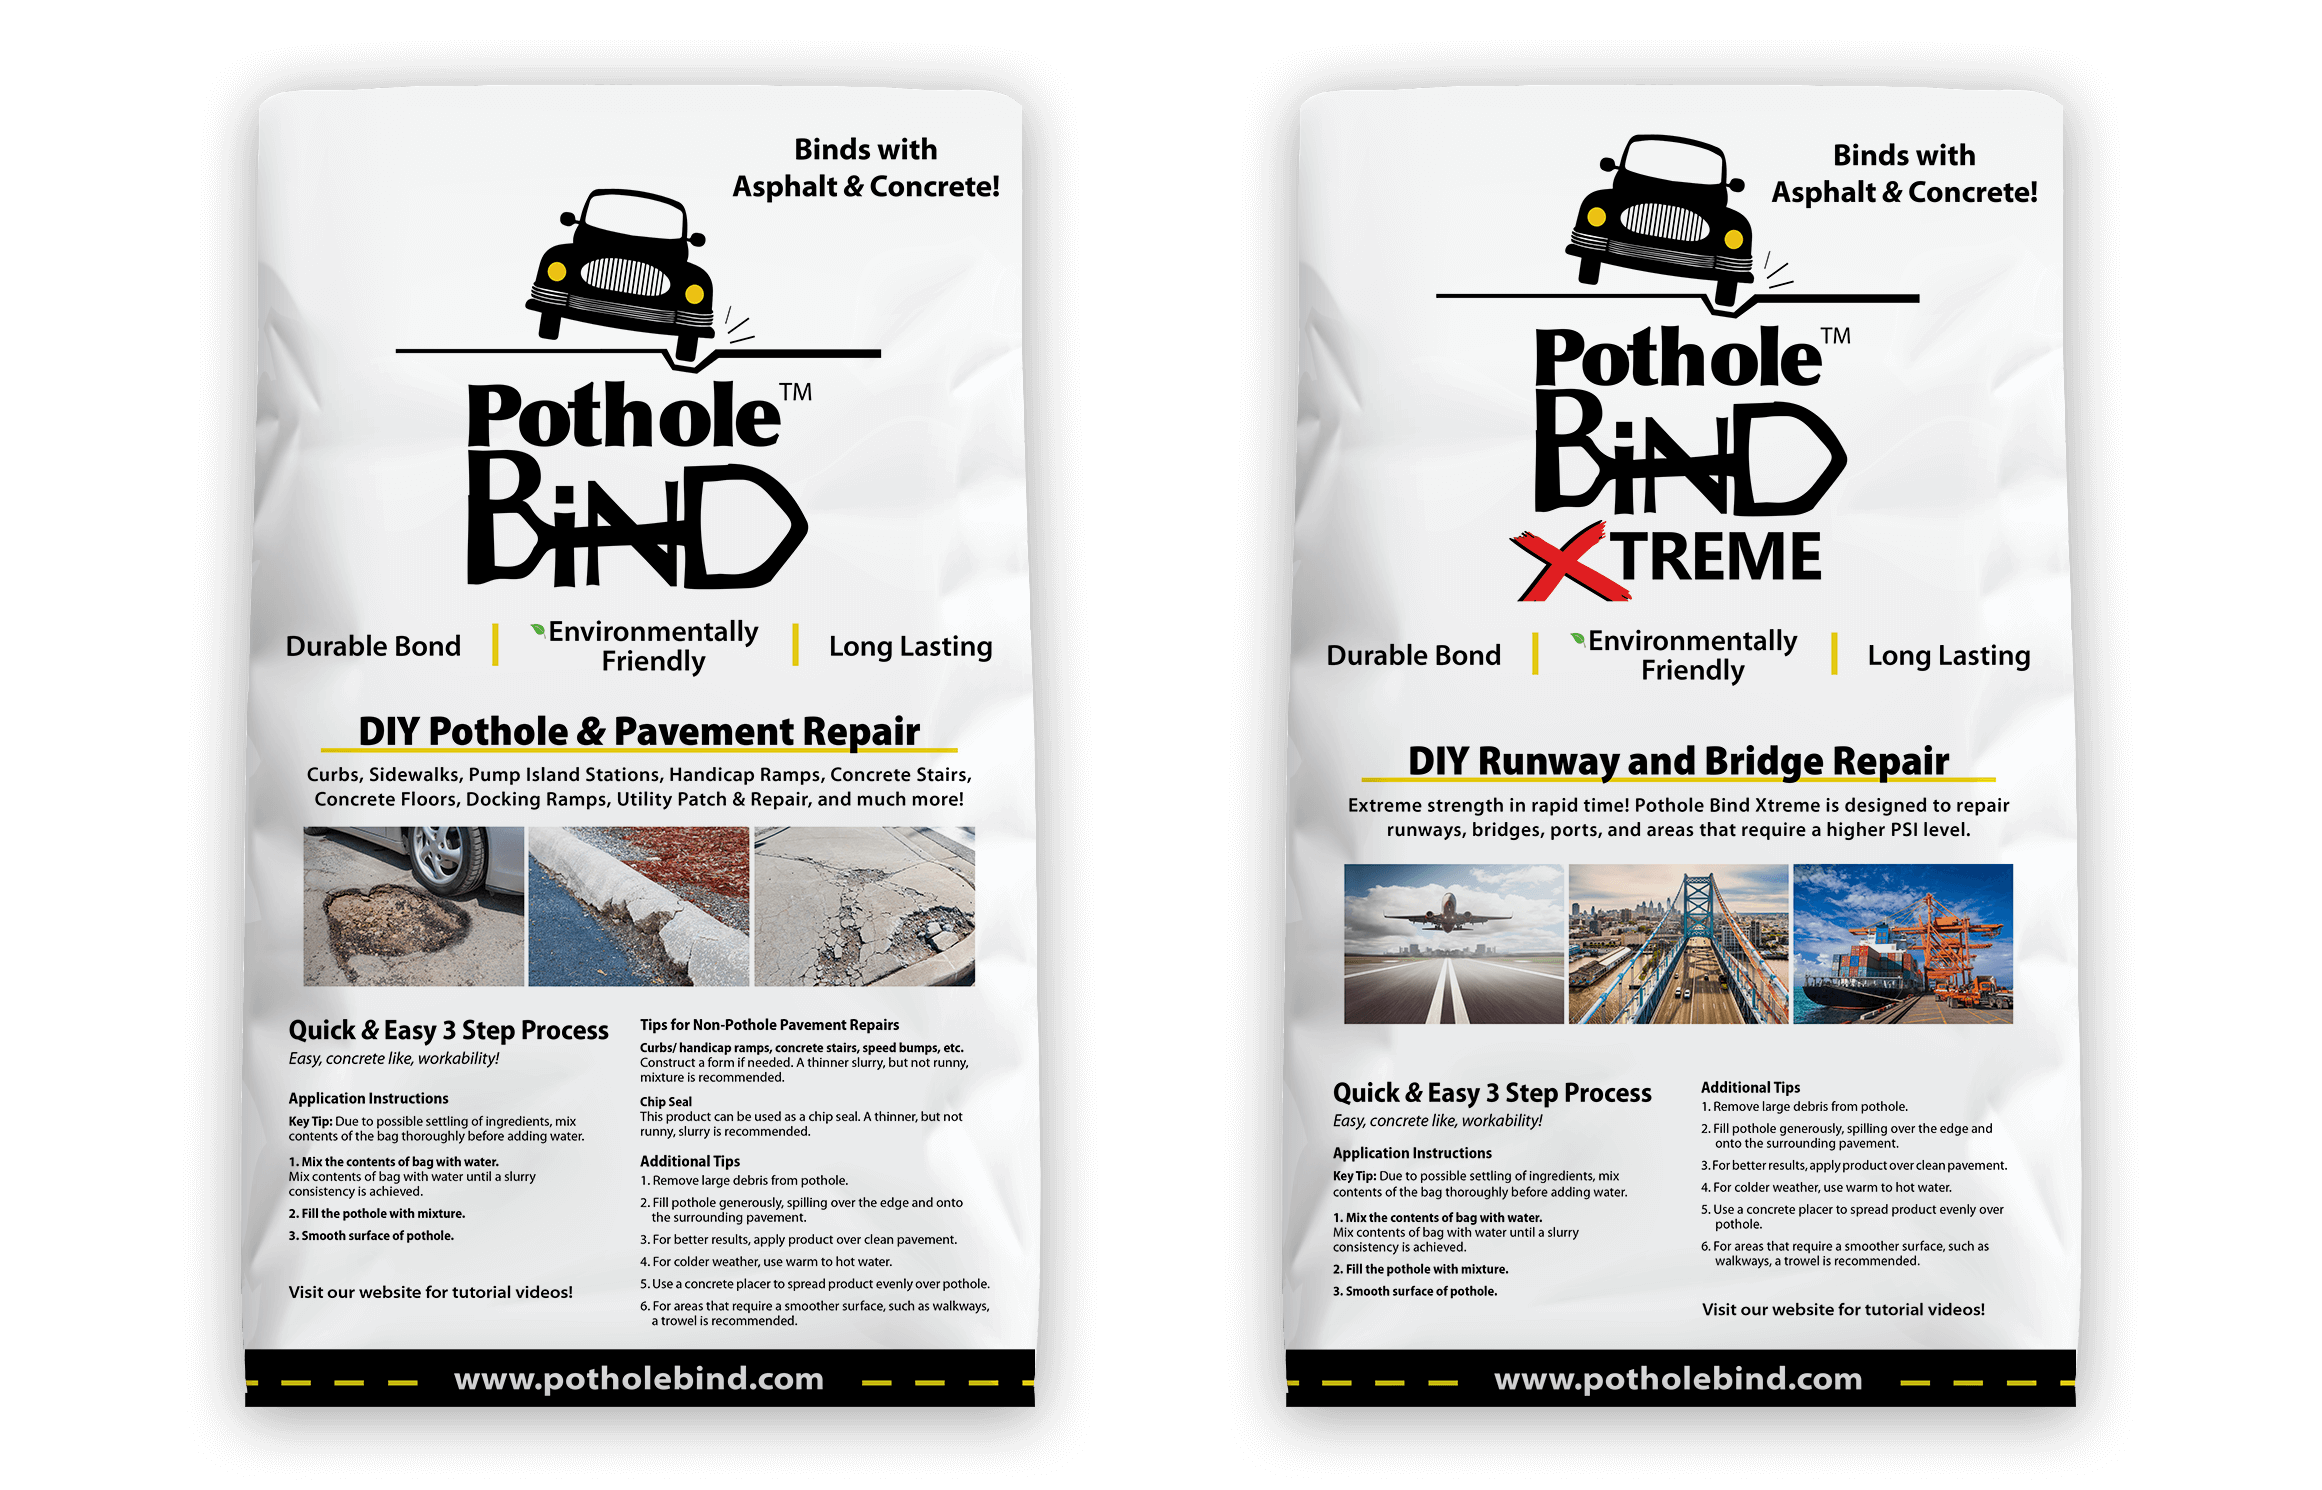 Pothole Bind bags side by side, the source for your DIY Pavement & Pothole Repair